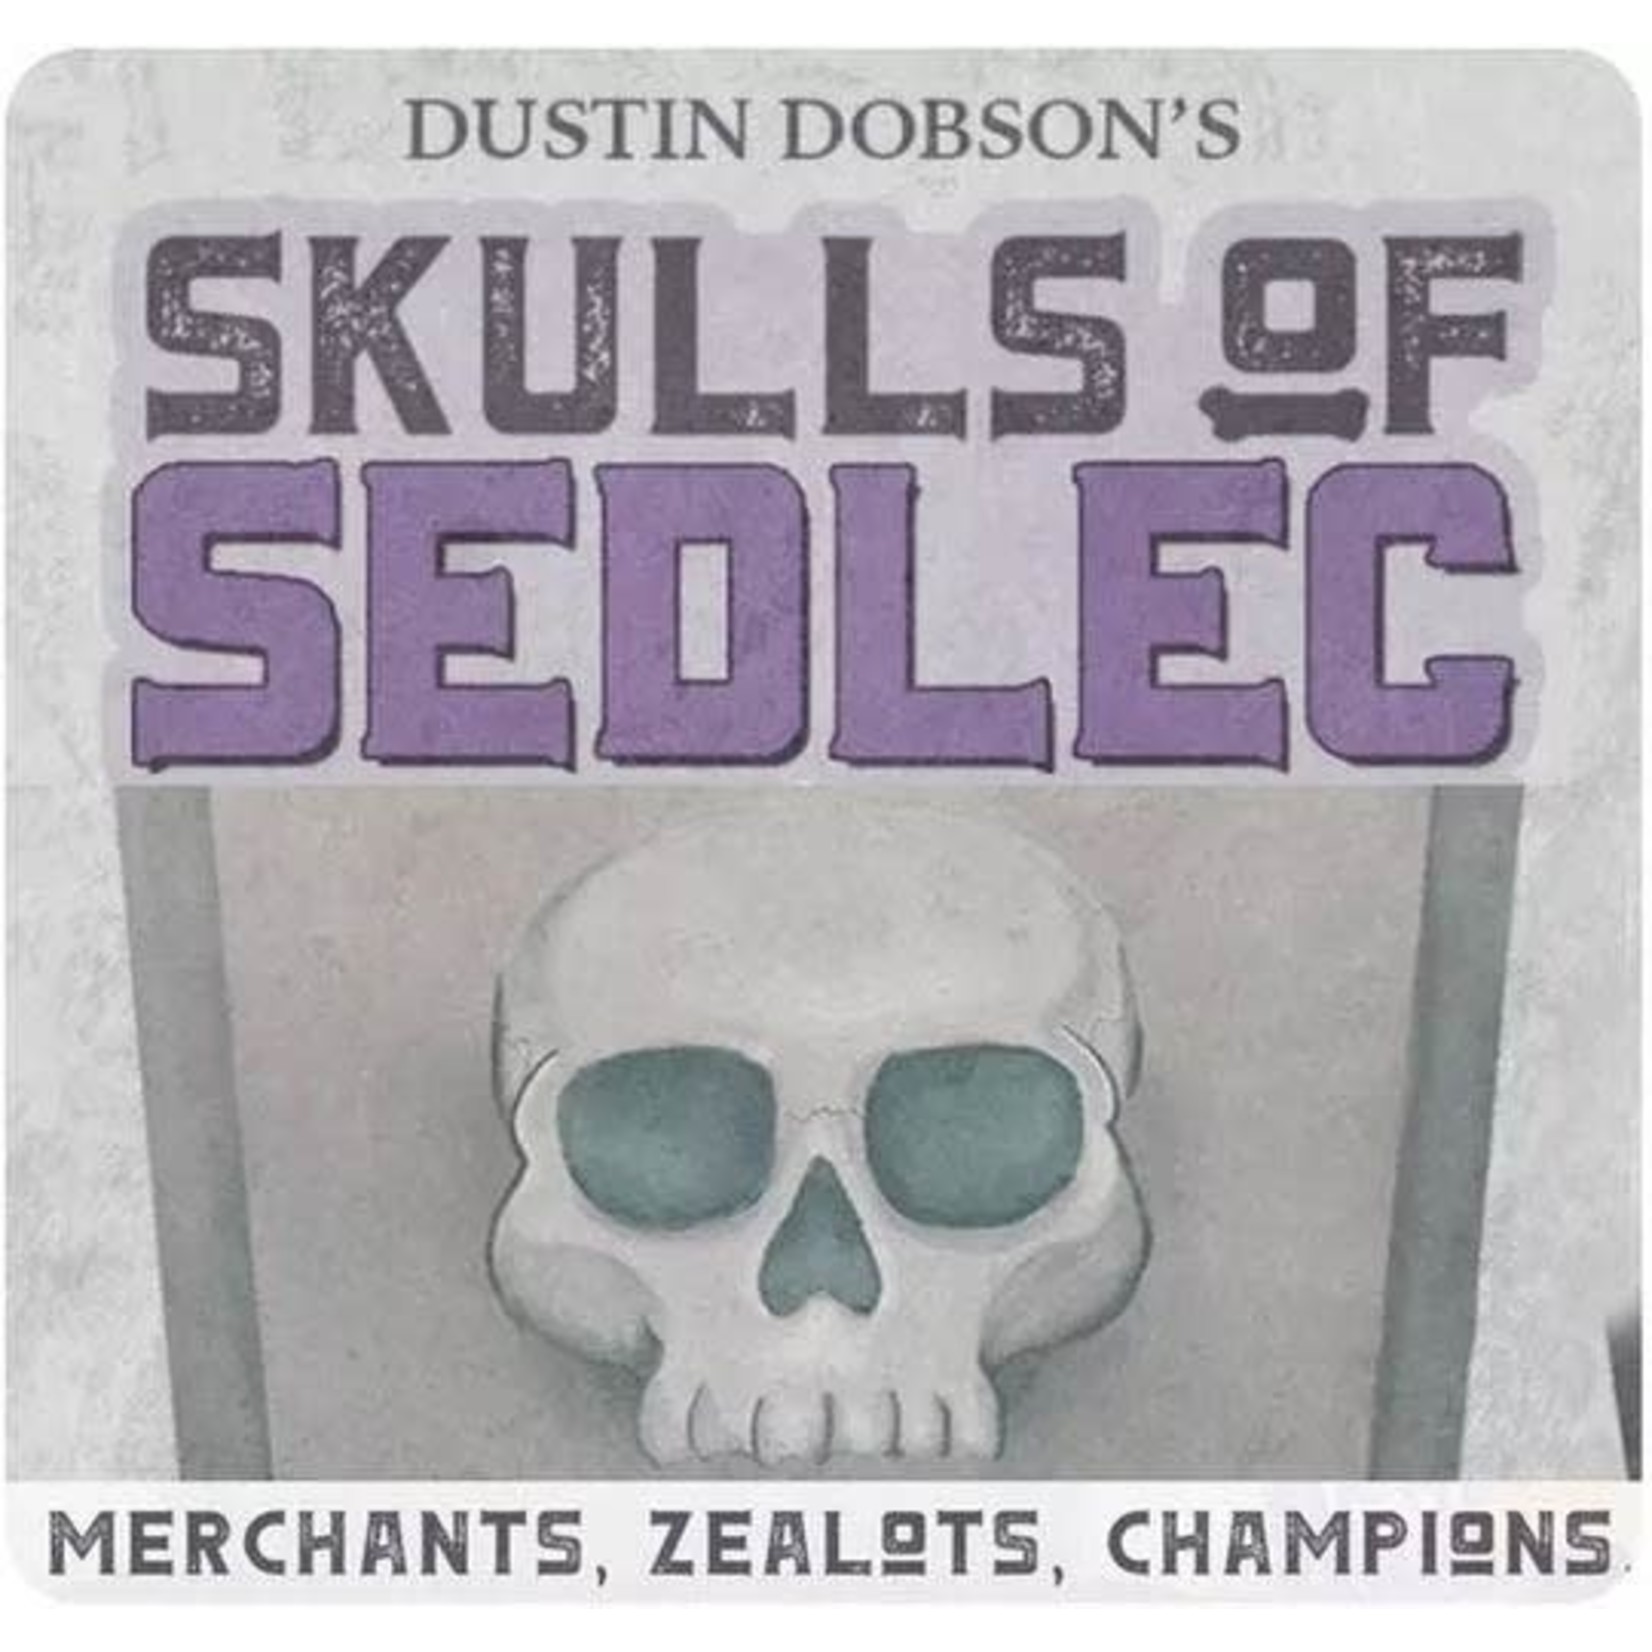 Button Shy Games Skulls of Sedlec: Expansion Collection